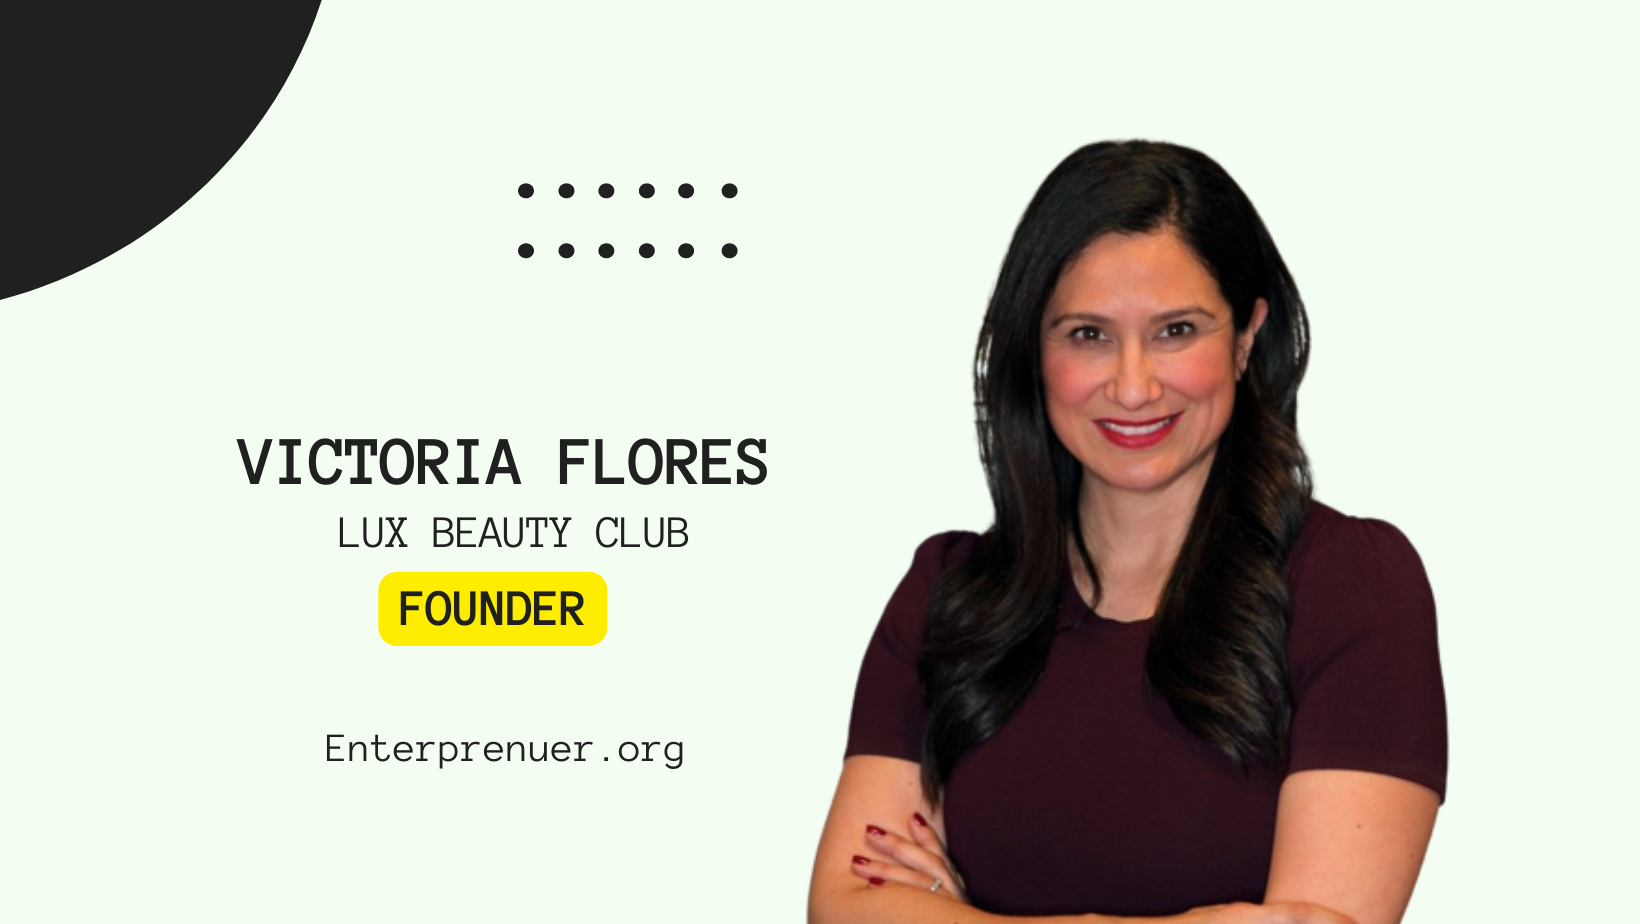 Meet Canna Queen Victoria Flores, Founder of Lux Beauty Club